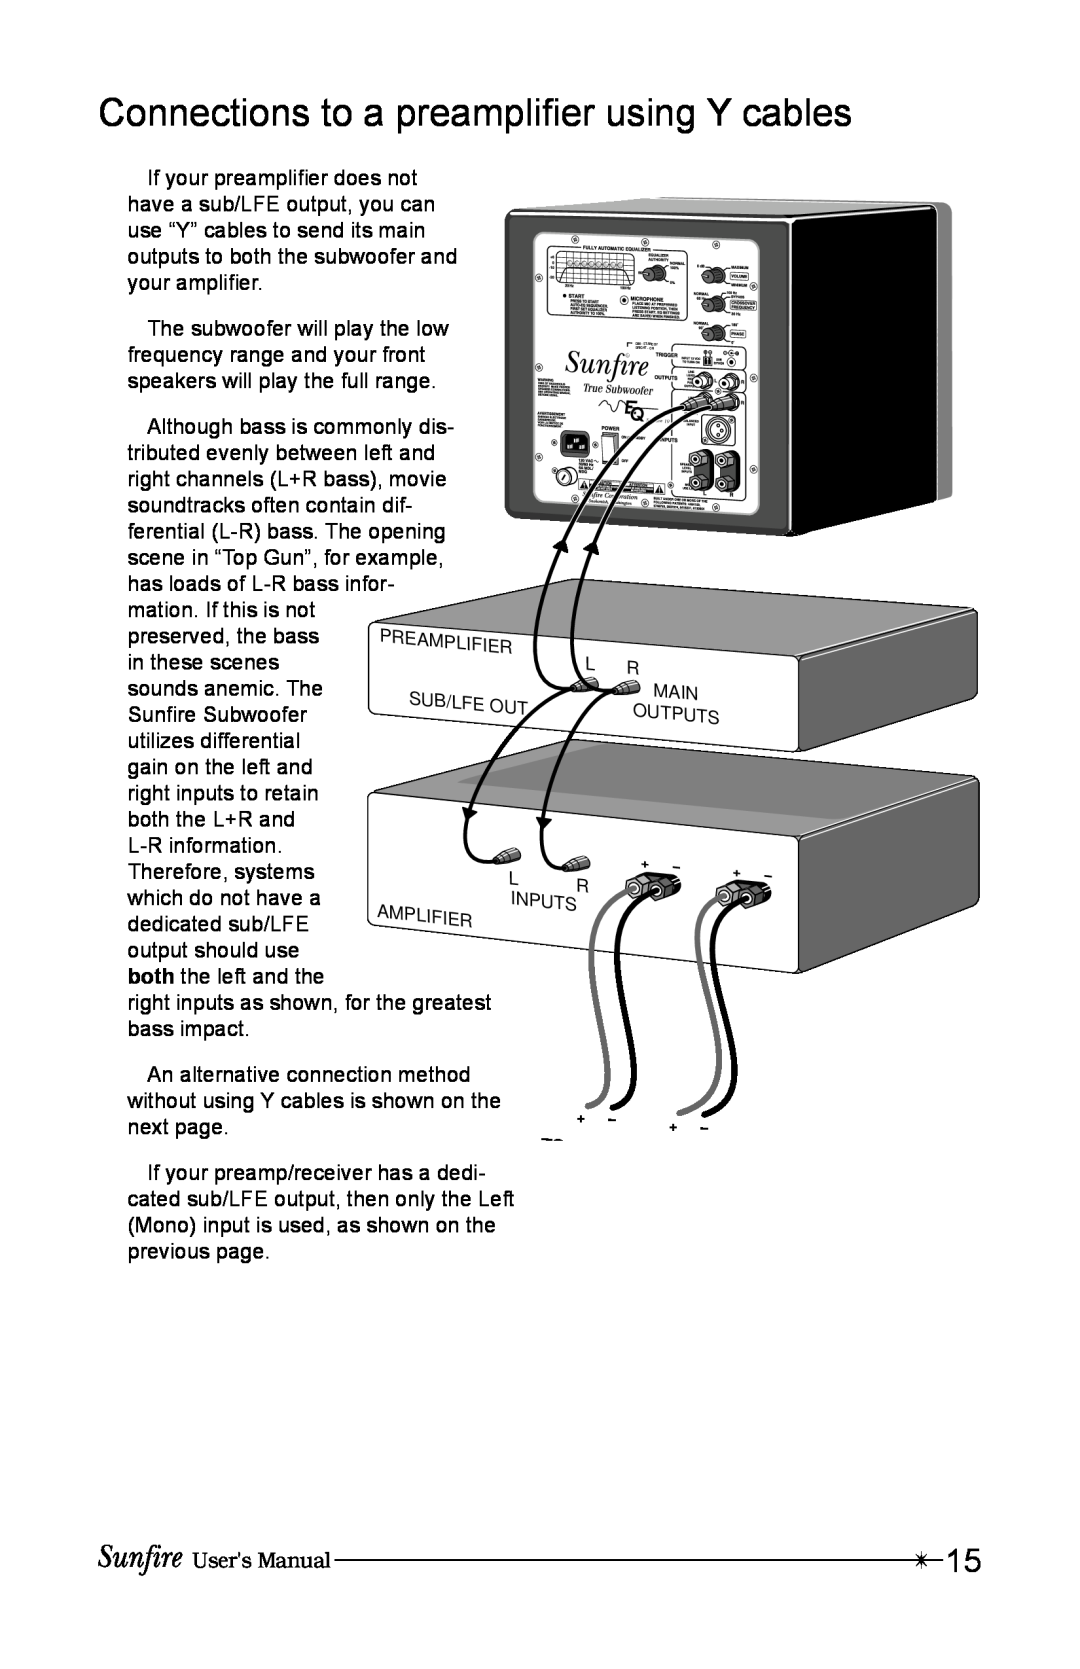 Sunfire 12 user manual Connections to a preampliÞer using Y cables 